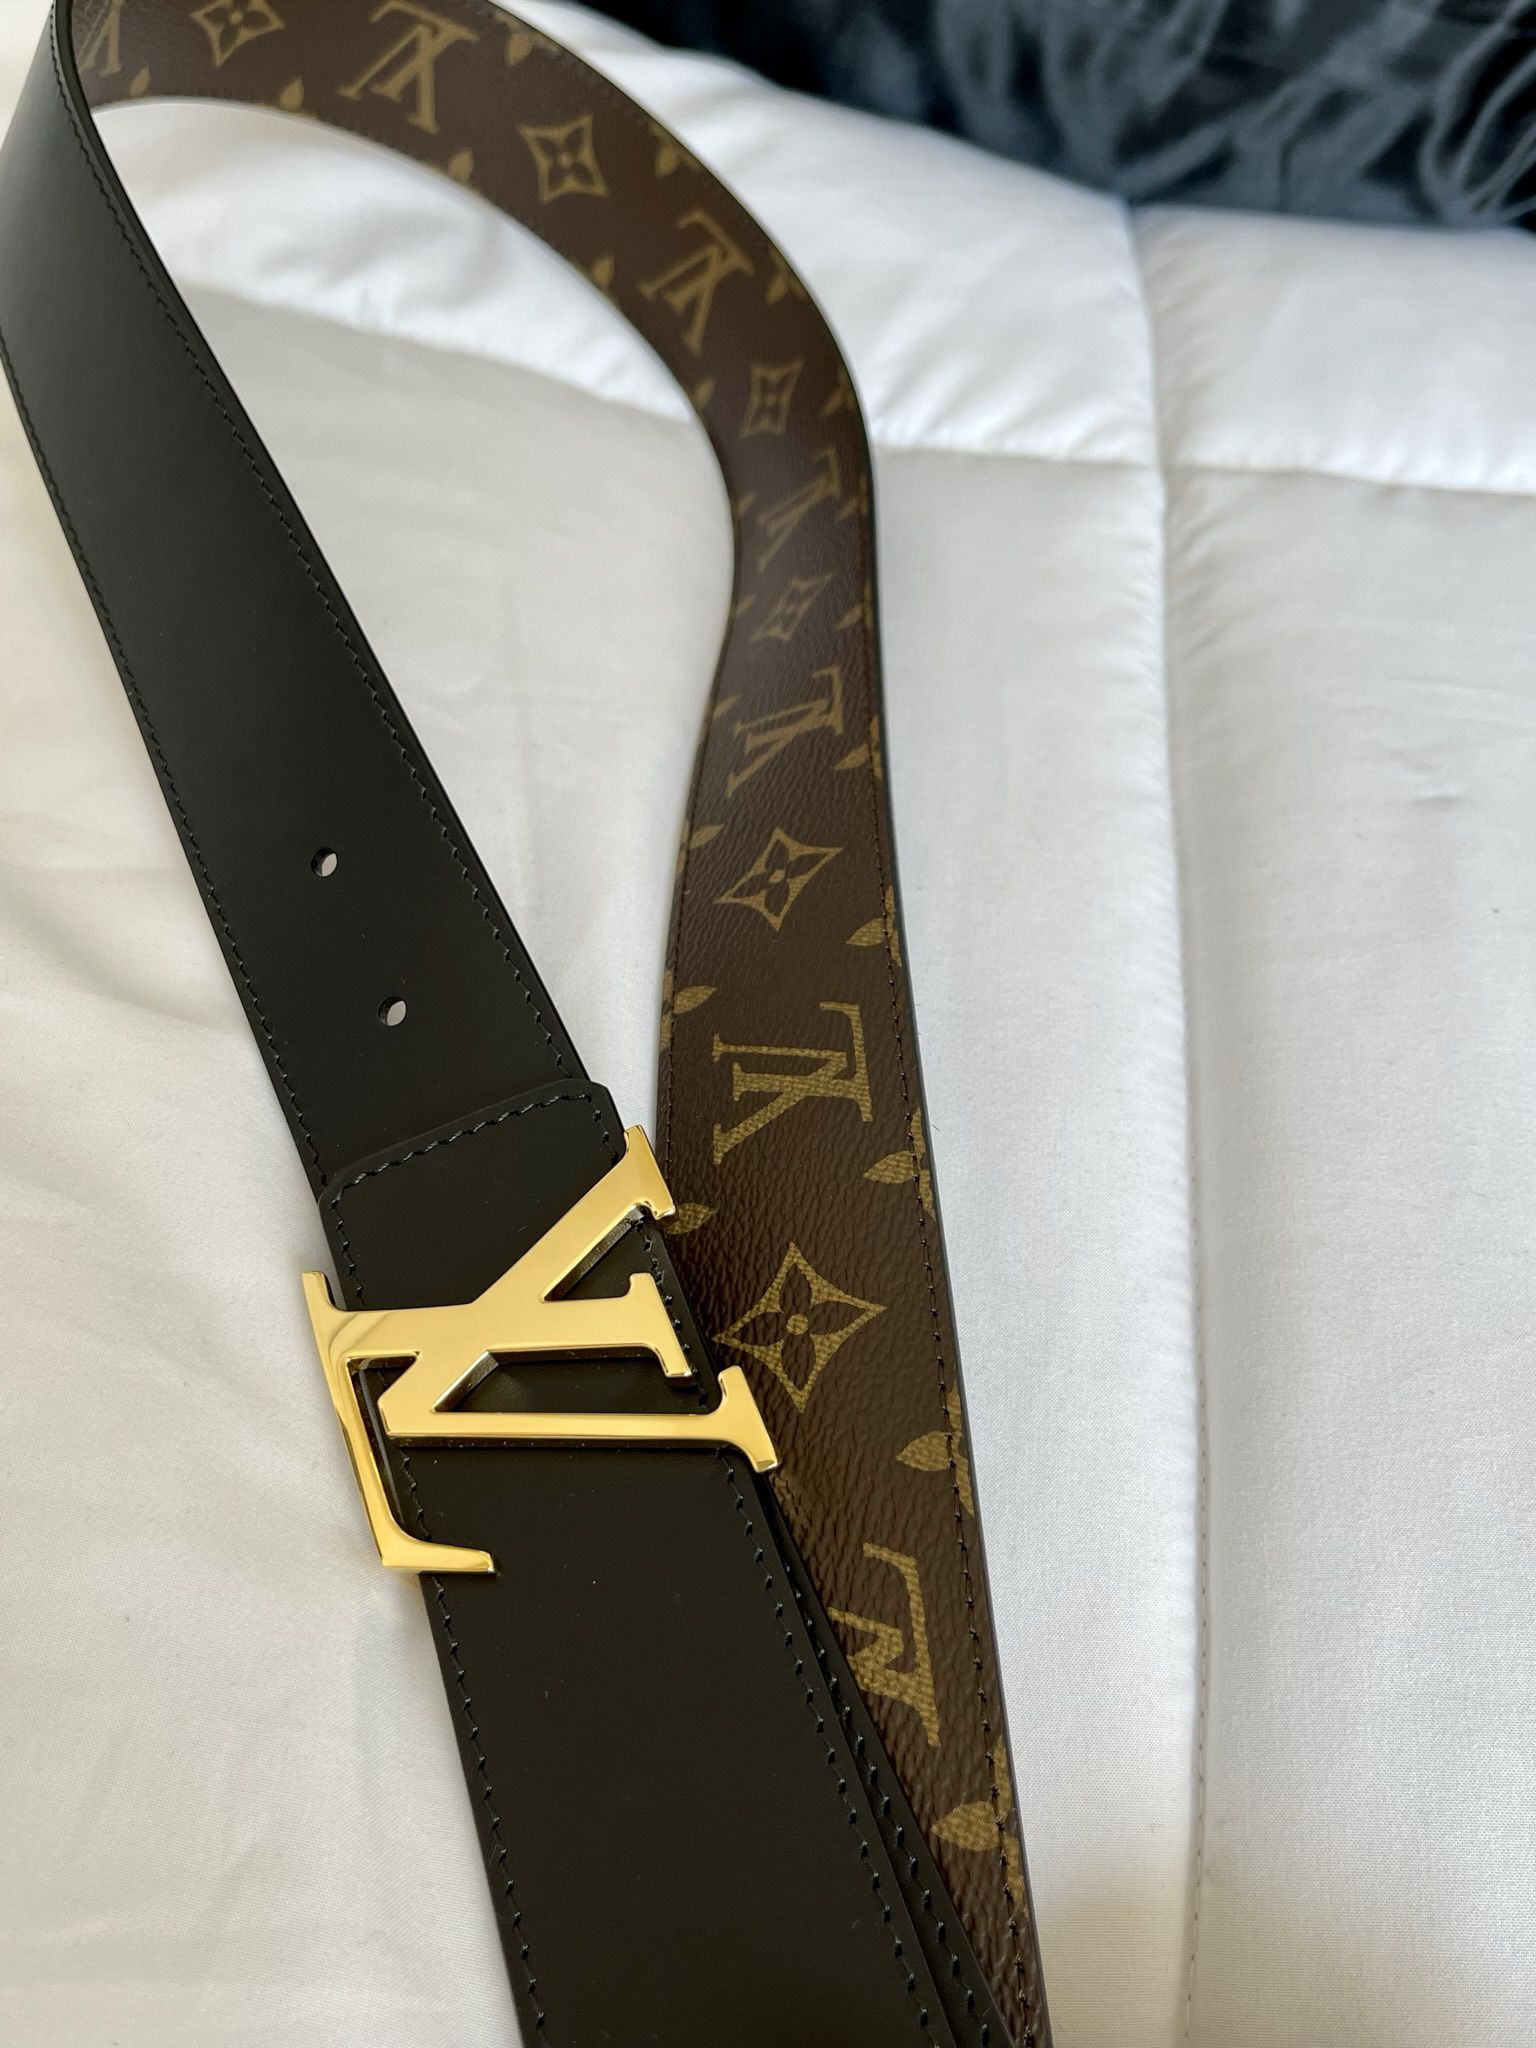 Authentic Louis Vuitton Belt for Sale in Fresno, CA - OfferUp